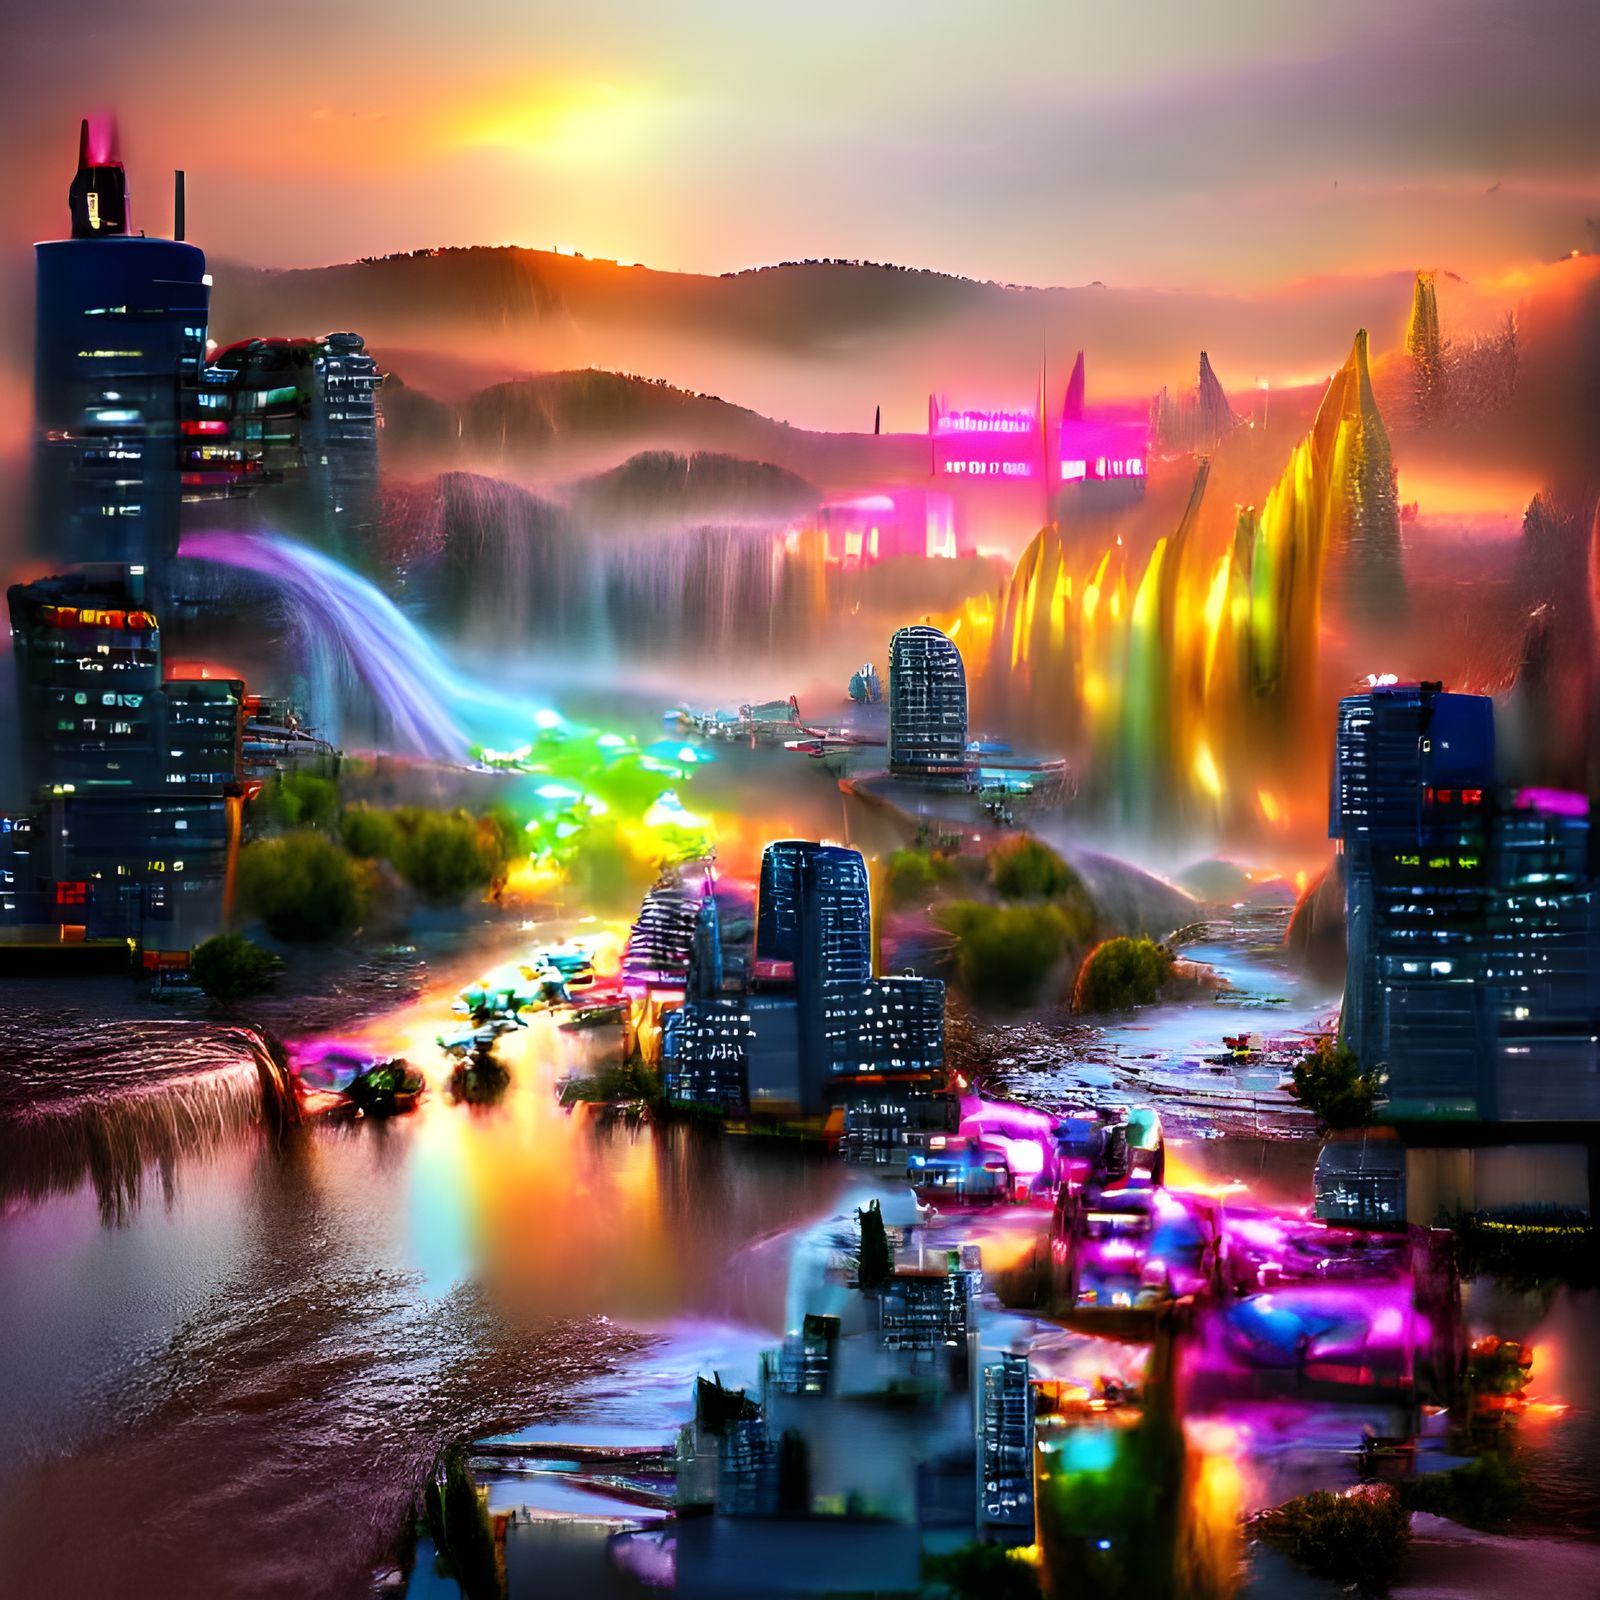 a golden cyberpunk city at sunset during fall filled with rainbow neon lights in a colorful dreamy rainbow nebula river ...